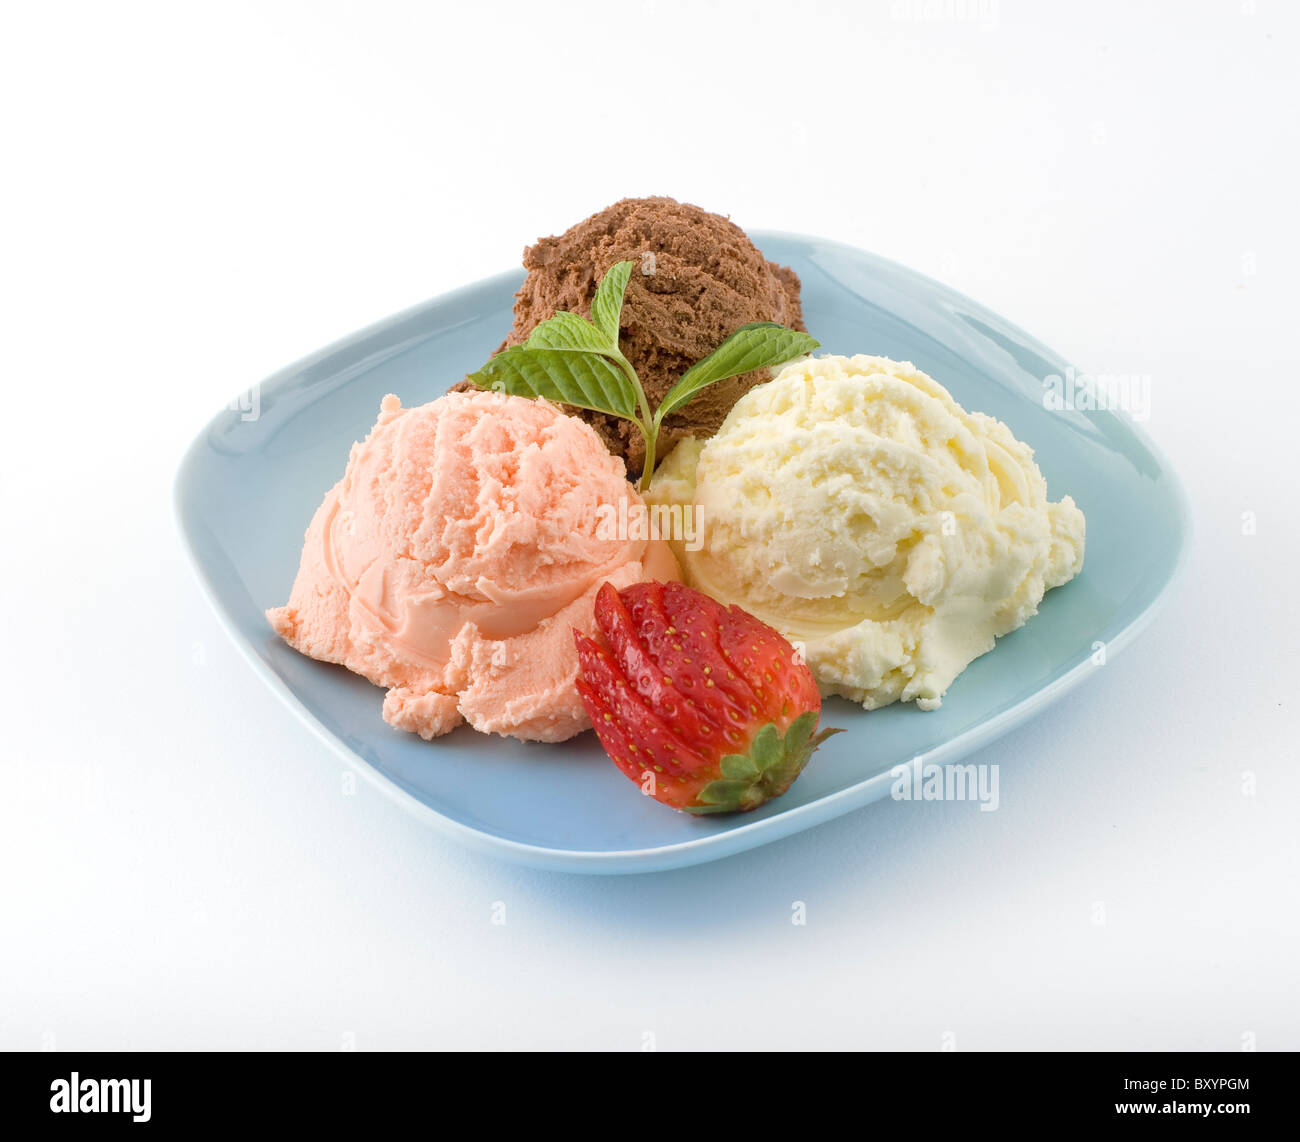 three flavored ice cream scoops on a pale blue plate, with